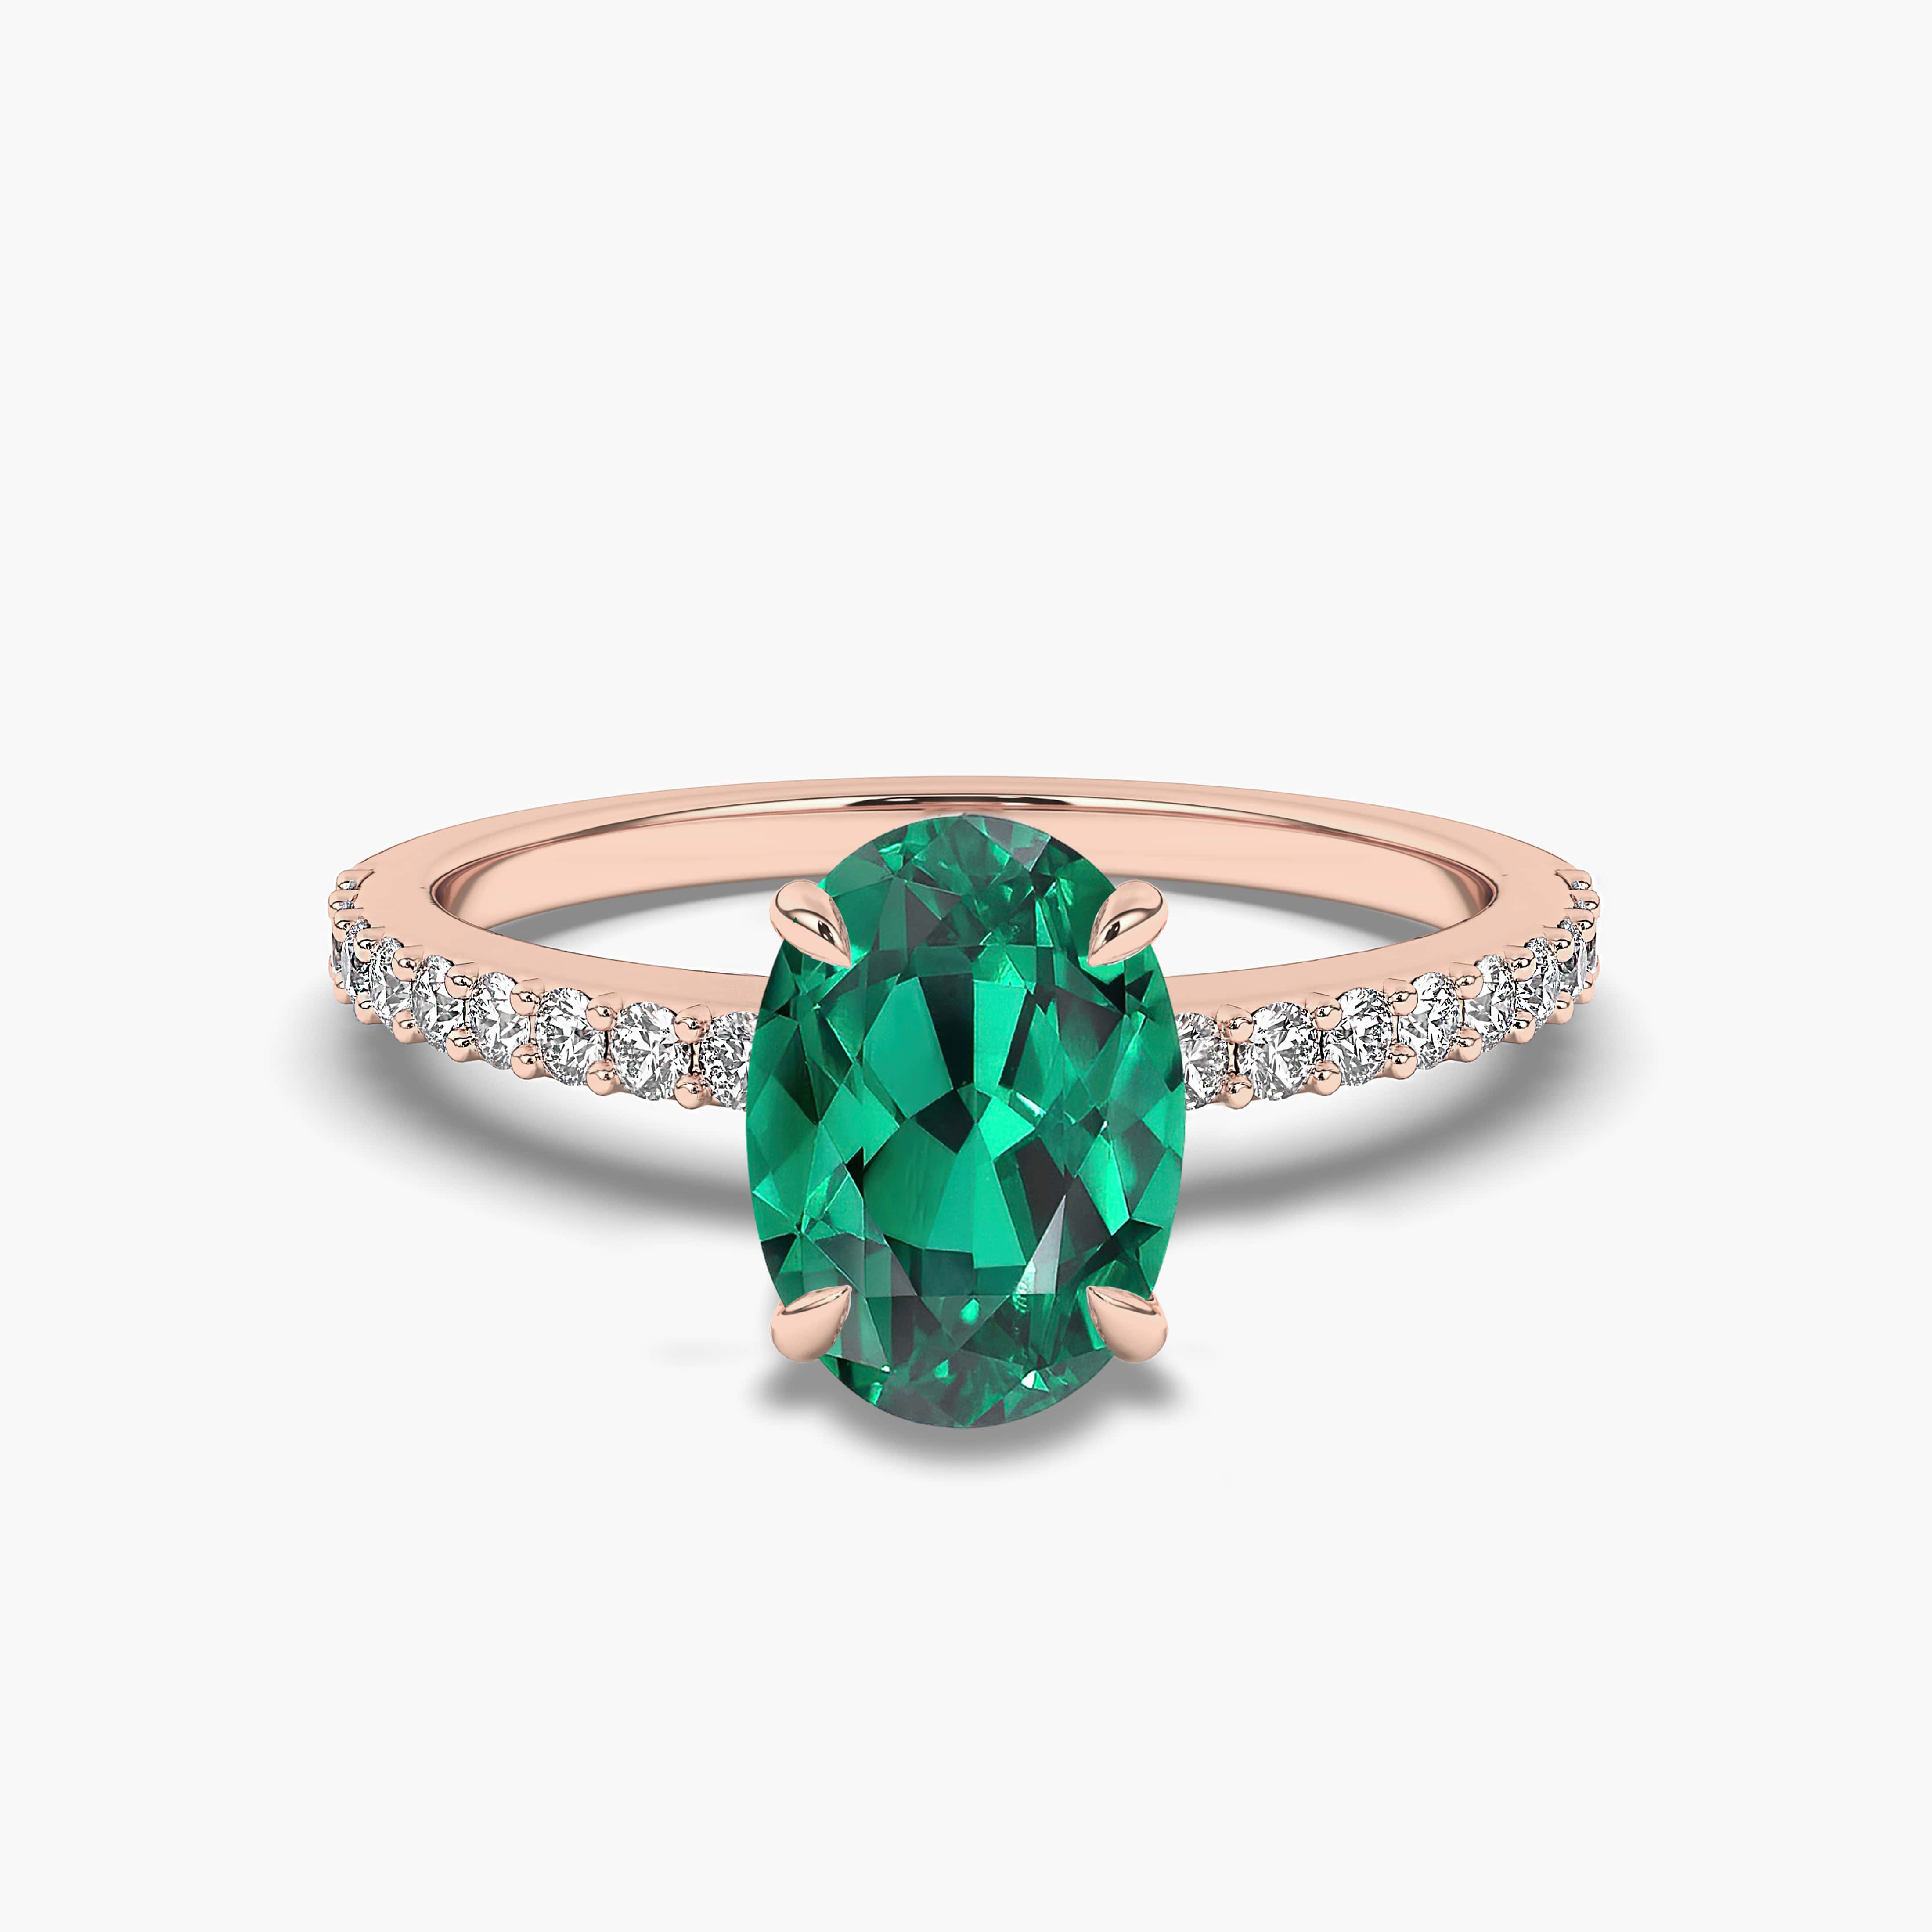 OVAL ENGAGEMENT RING WITH EMERALD ACCENT STONES IN ROSE GOLD FOR WOMAN'S